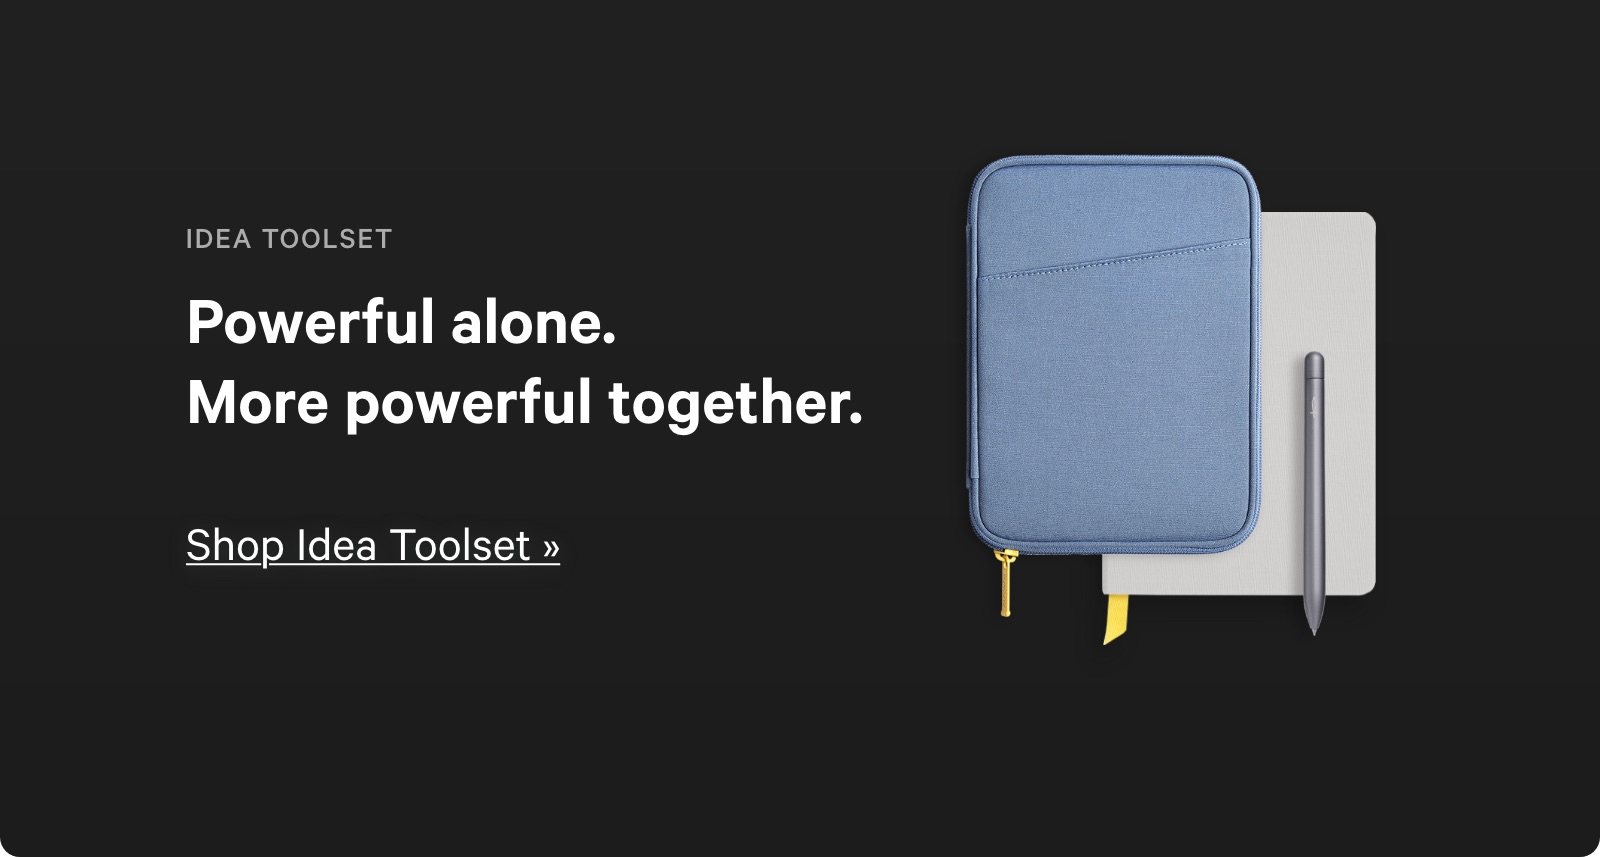 Powerful alone. More powerful together. Shop Idea Toolset ?